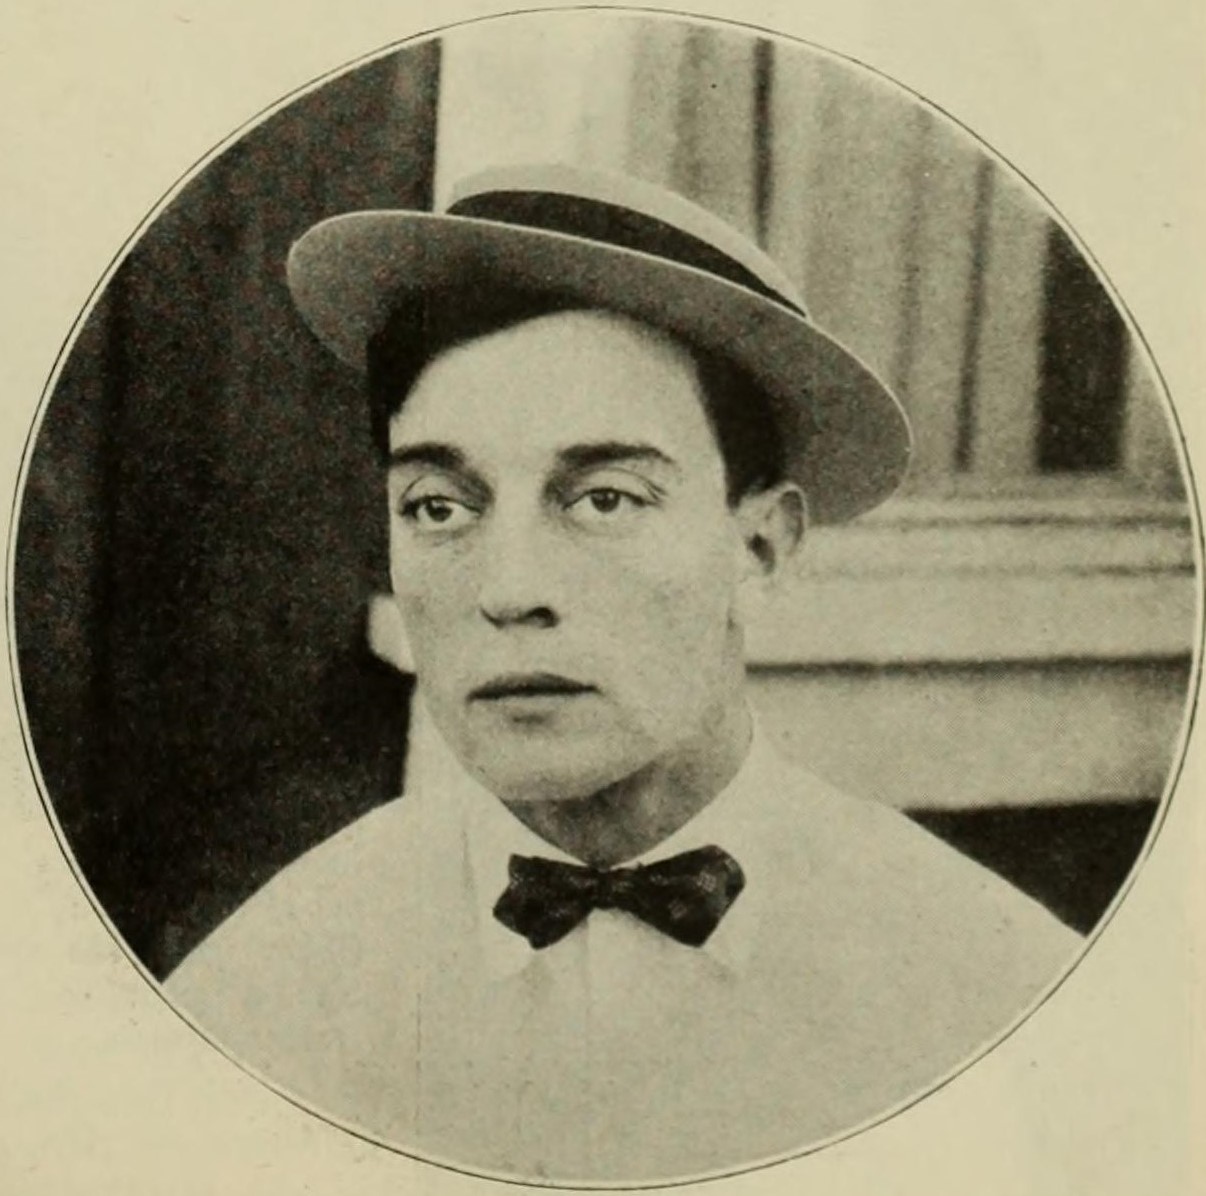 a man in a pork pie hat, white shirt and bow tie